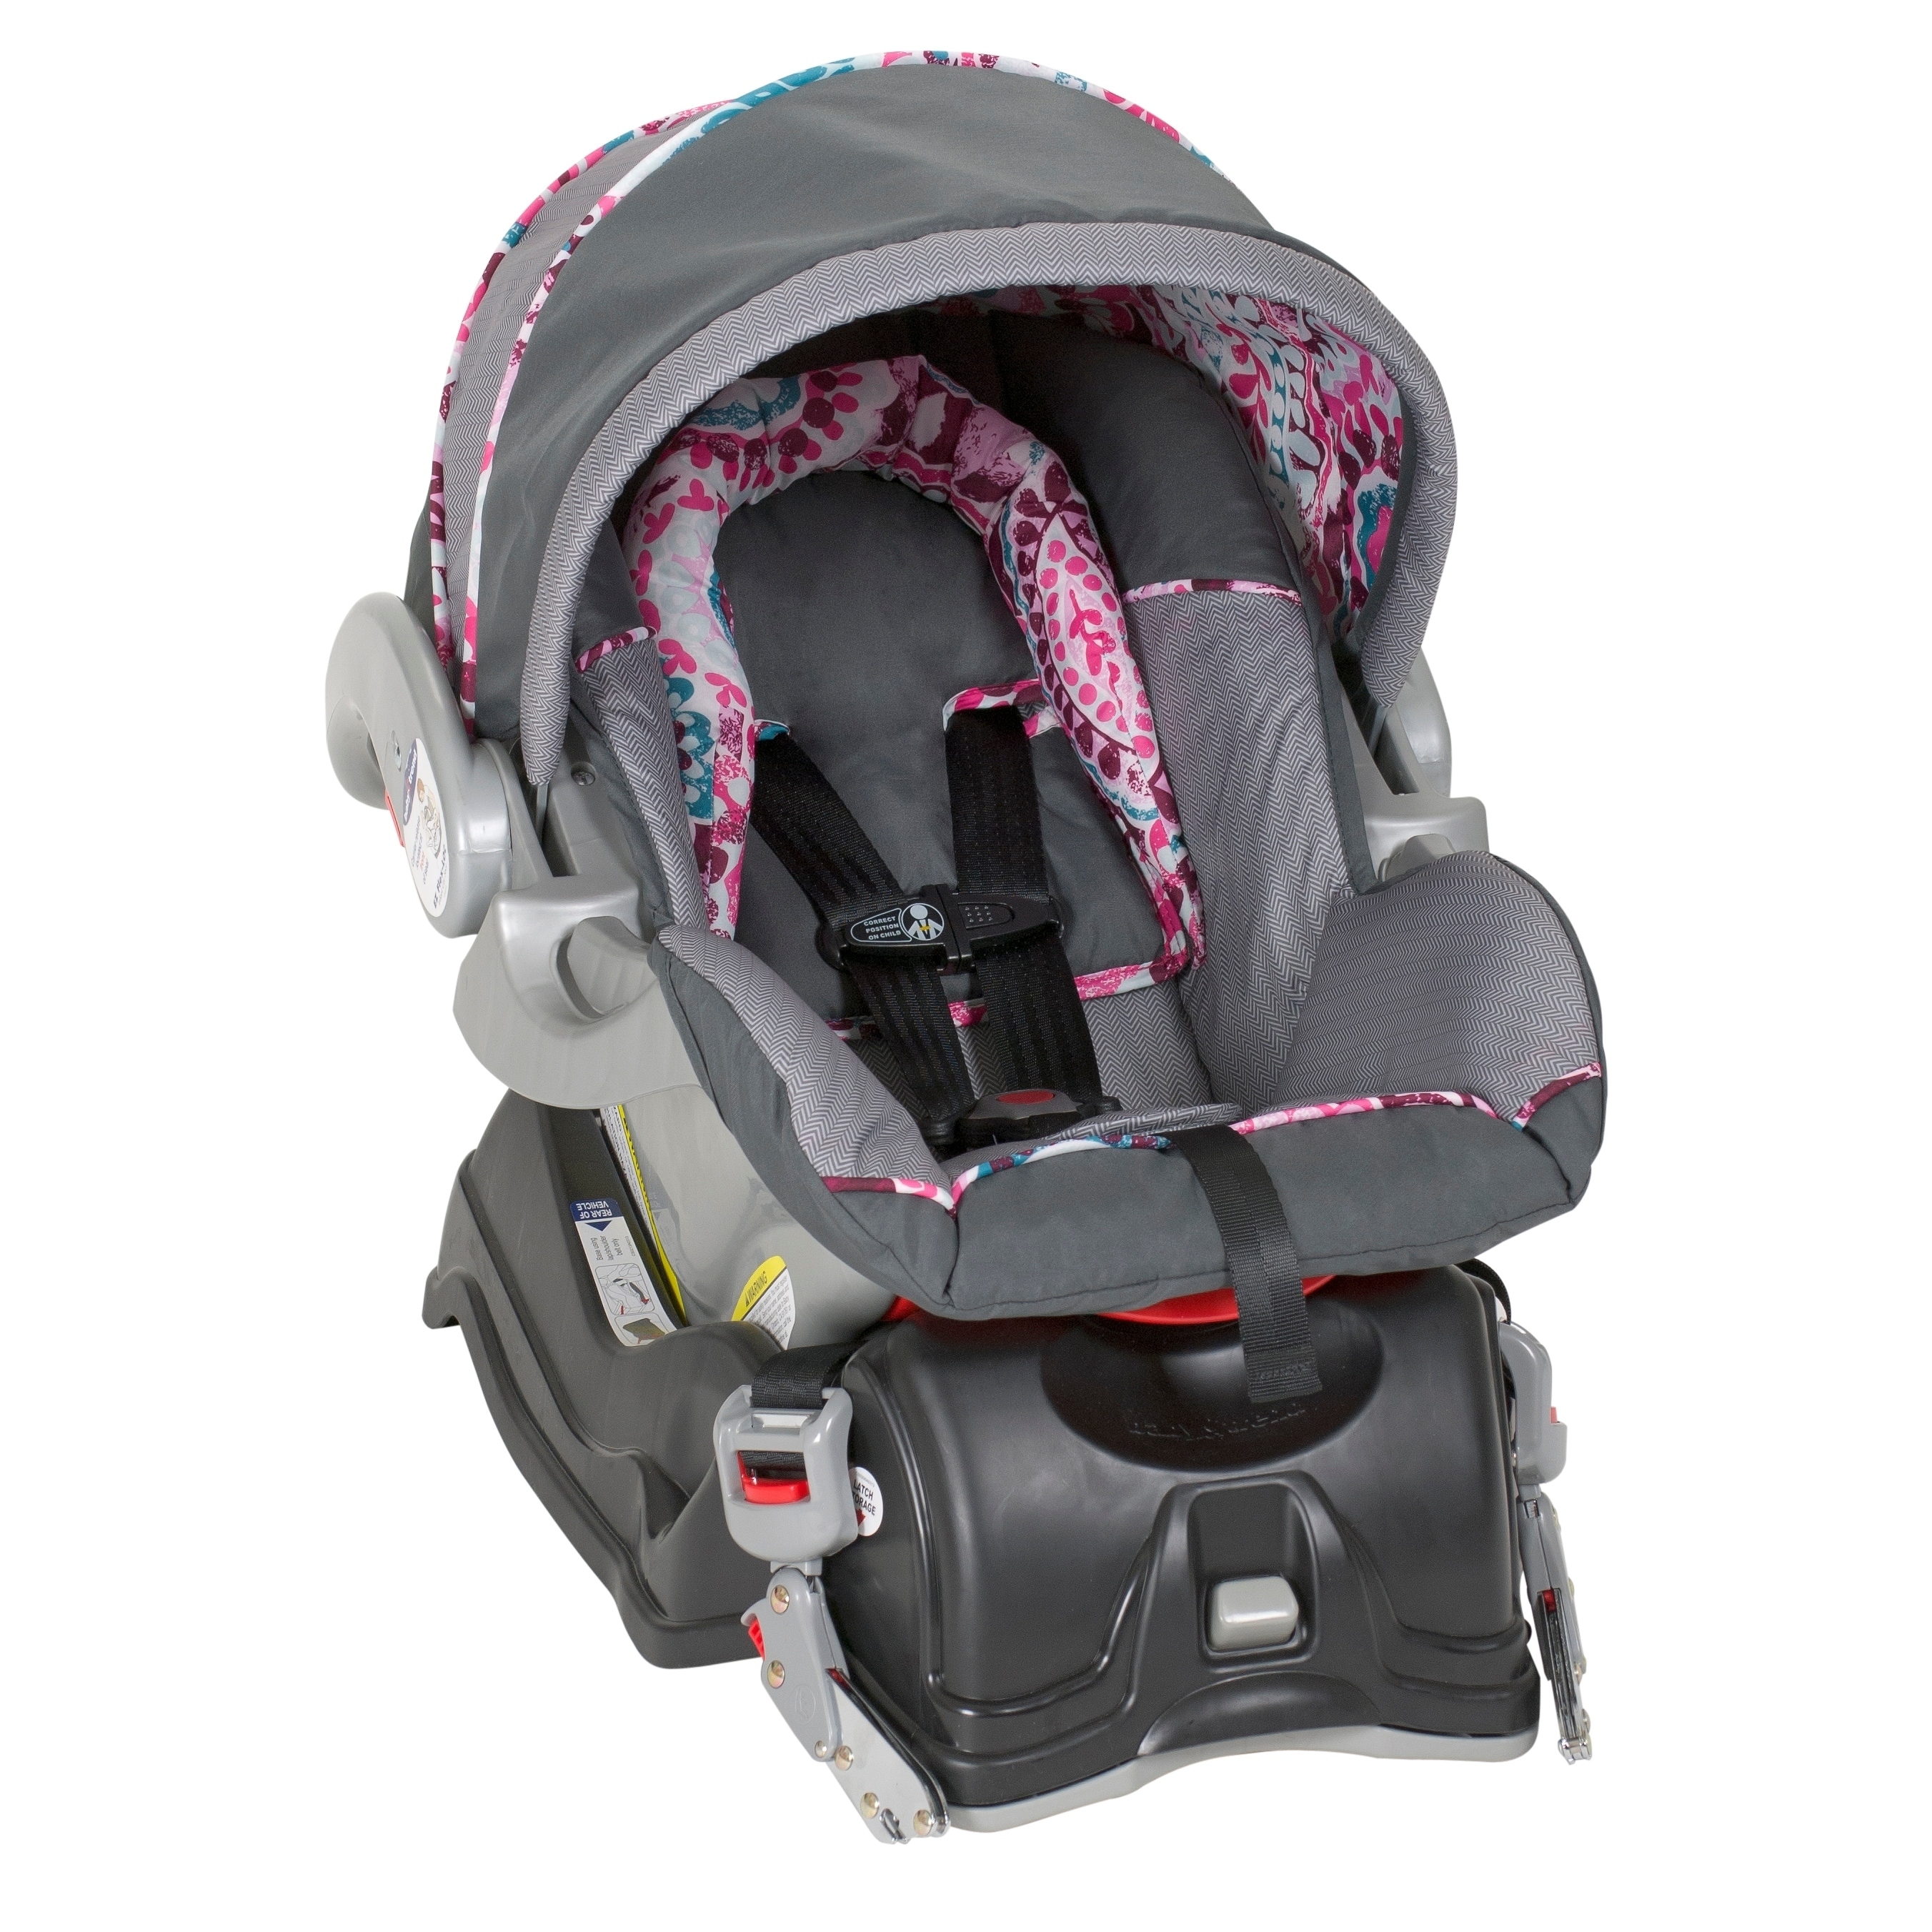 Baby Trend EZ Ride 5 Travel System, Paisley - image 4 of 6